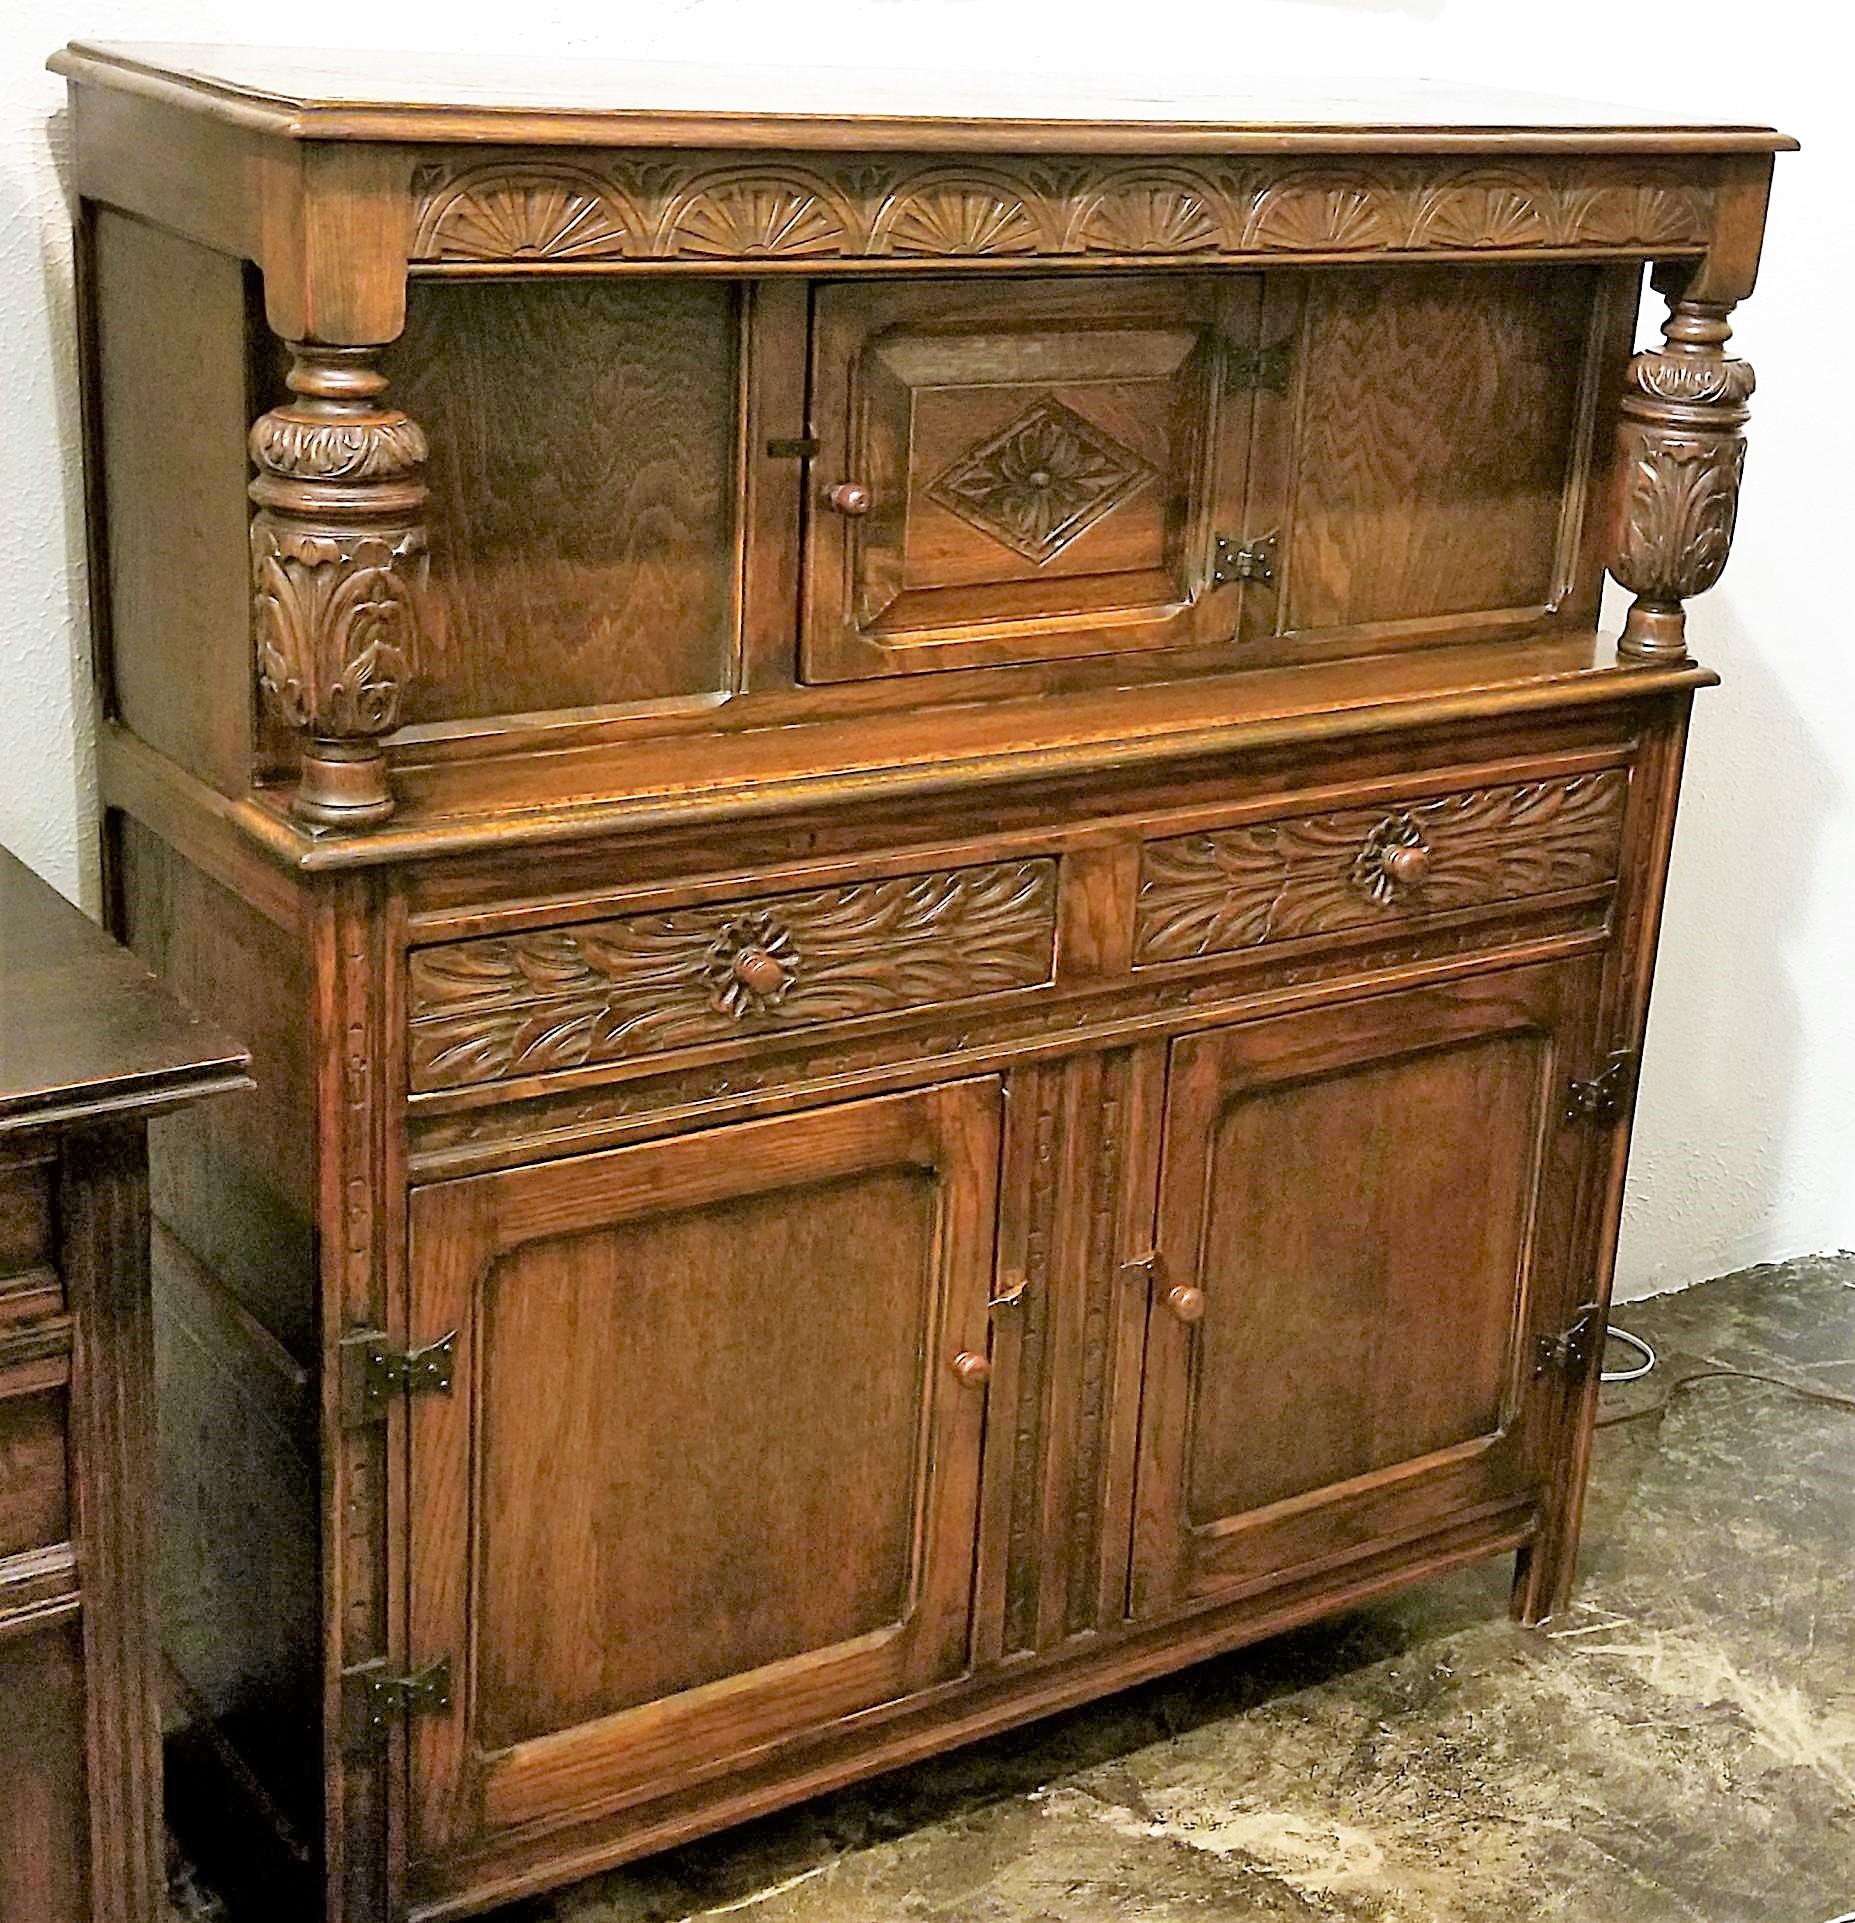 Presenting a really nice example of an early 20th century English oak Renaissance Revival cabinet, all hand carved.

Probably made circa 1900 of English Oak.

Hand carved fan effect under the top shelf.

Hand carved acanthus baluster pillars